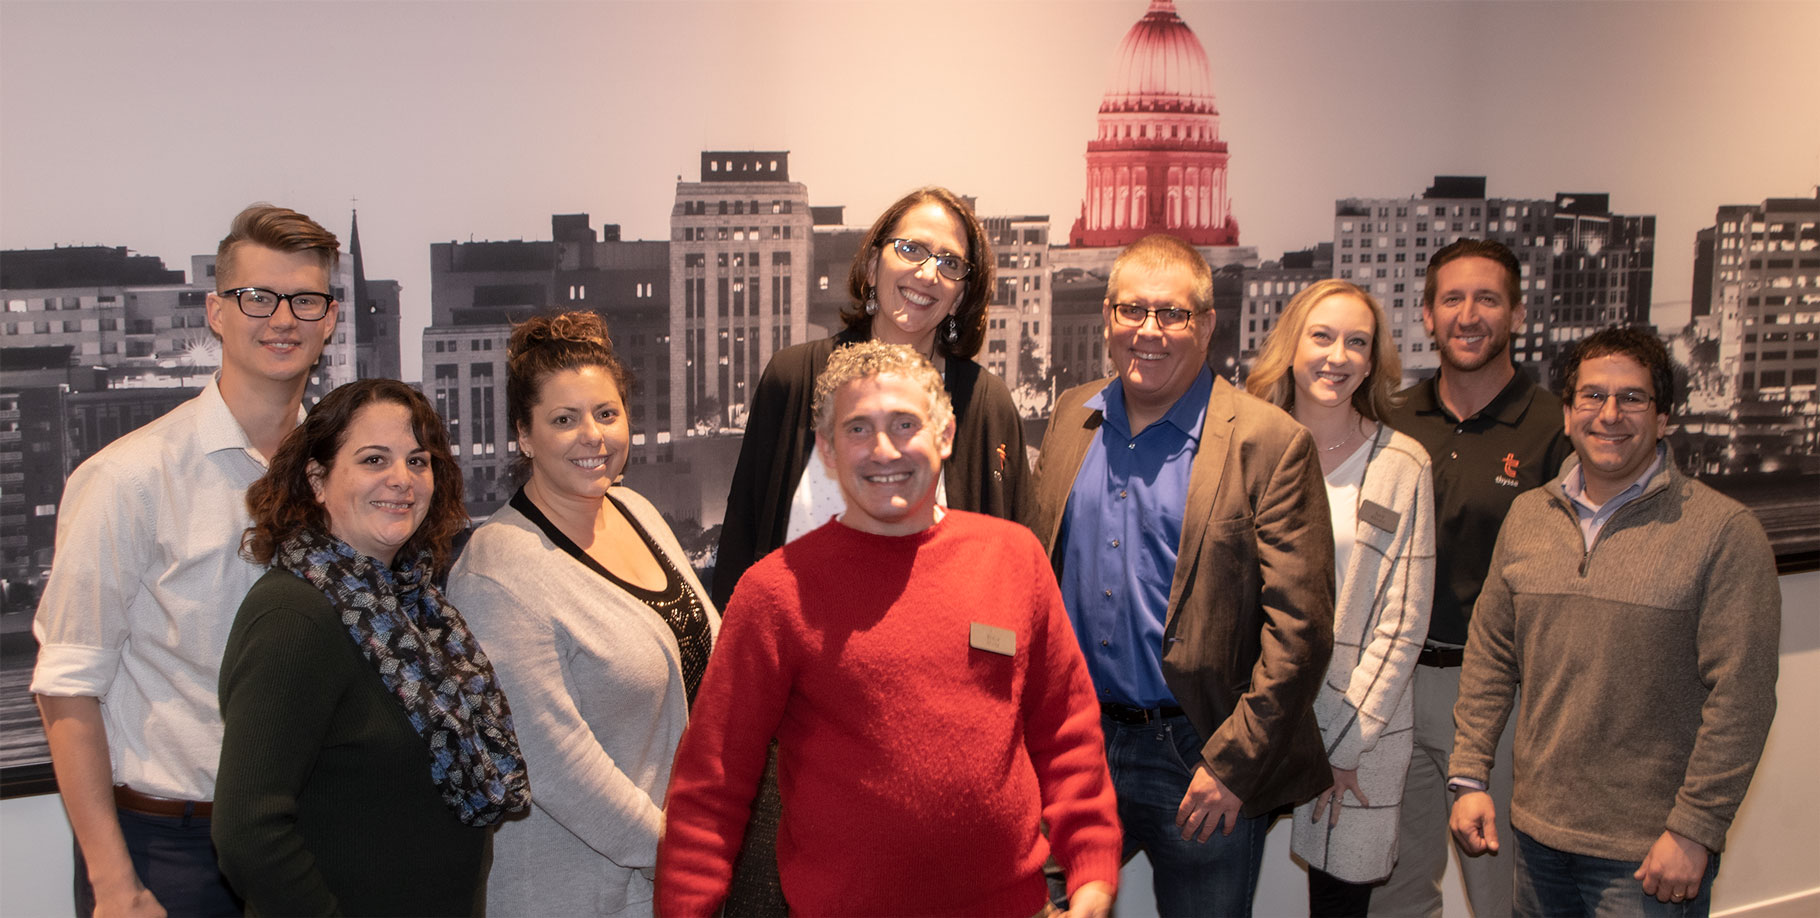 The AMA Madison Board with Signature Speaker, Peter Shankman